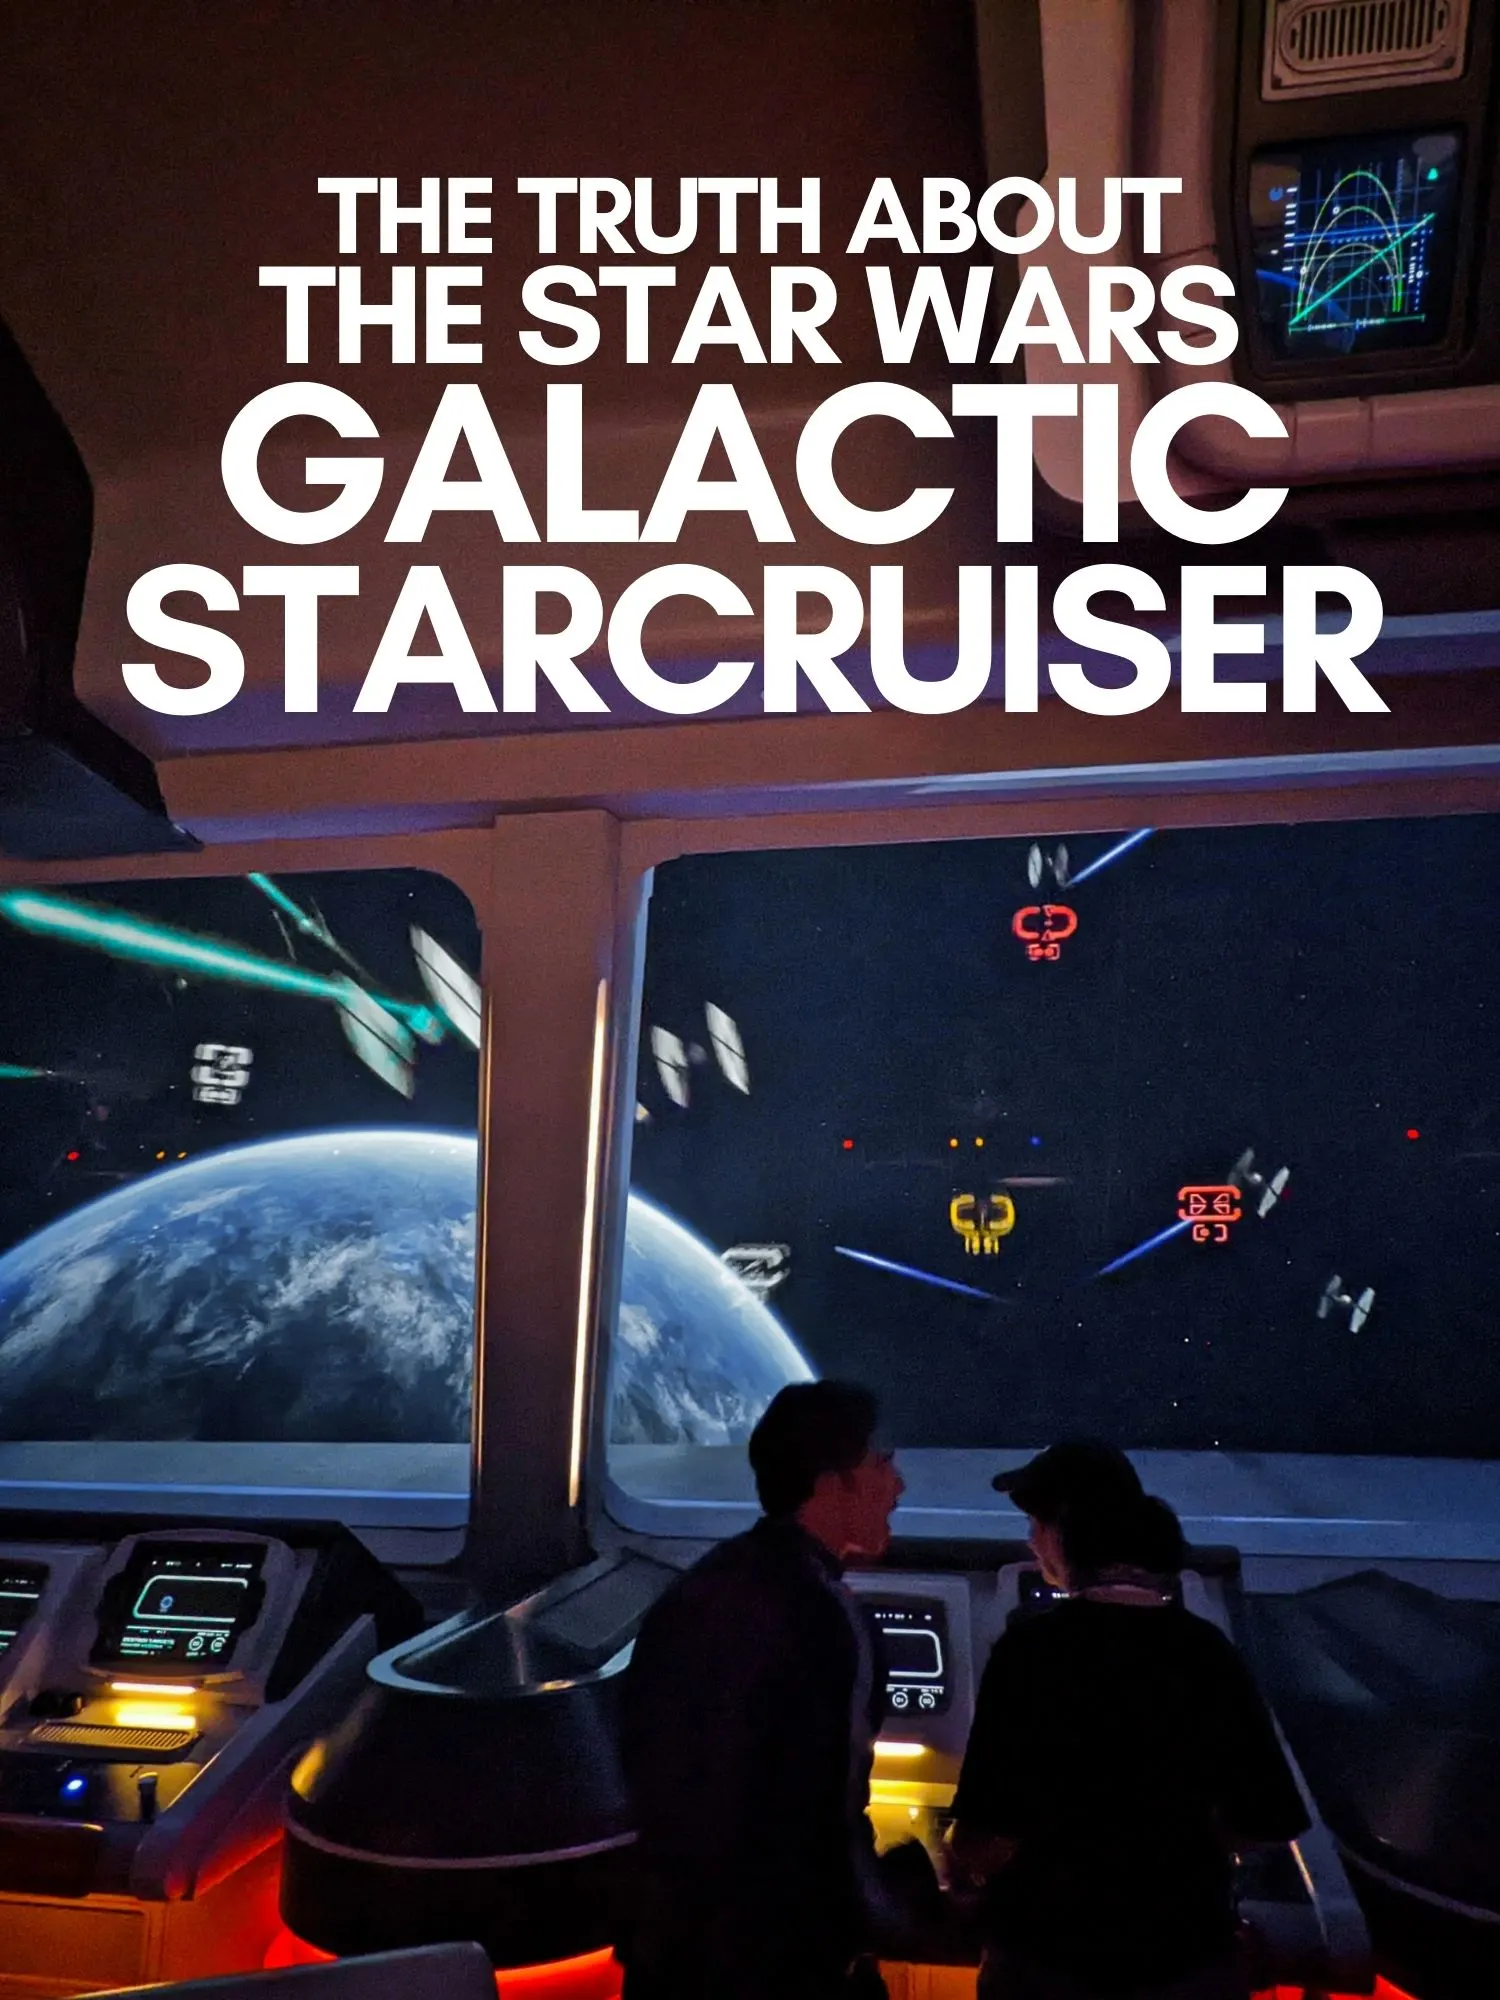 The Star Wars Galactic Starcruiser is NOT a hotel, but an interactive theater experience lasting two and a half days. Here's the truth about what to actually expect from somebody who's actually been there.